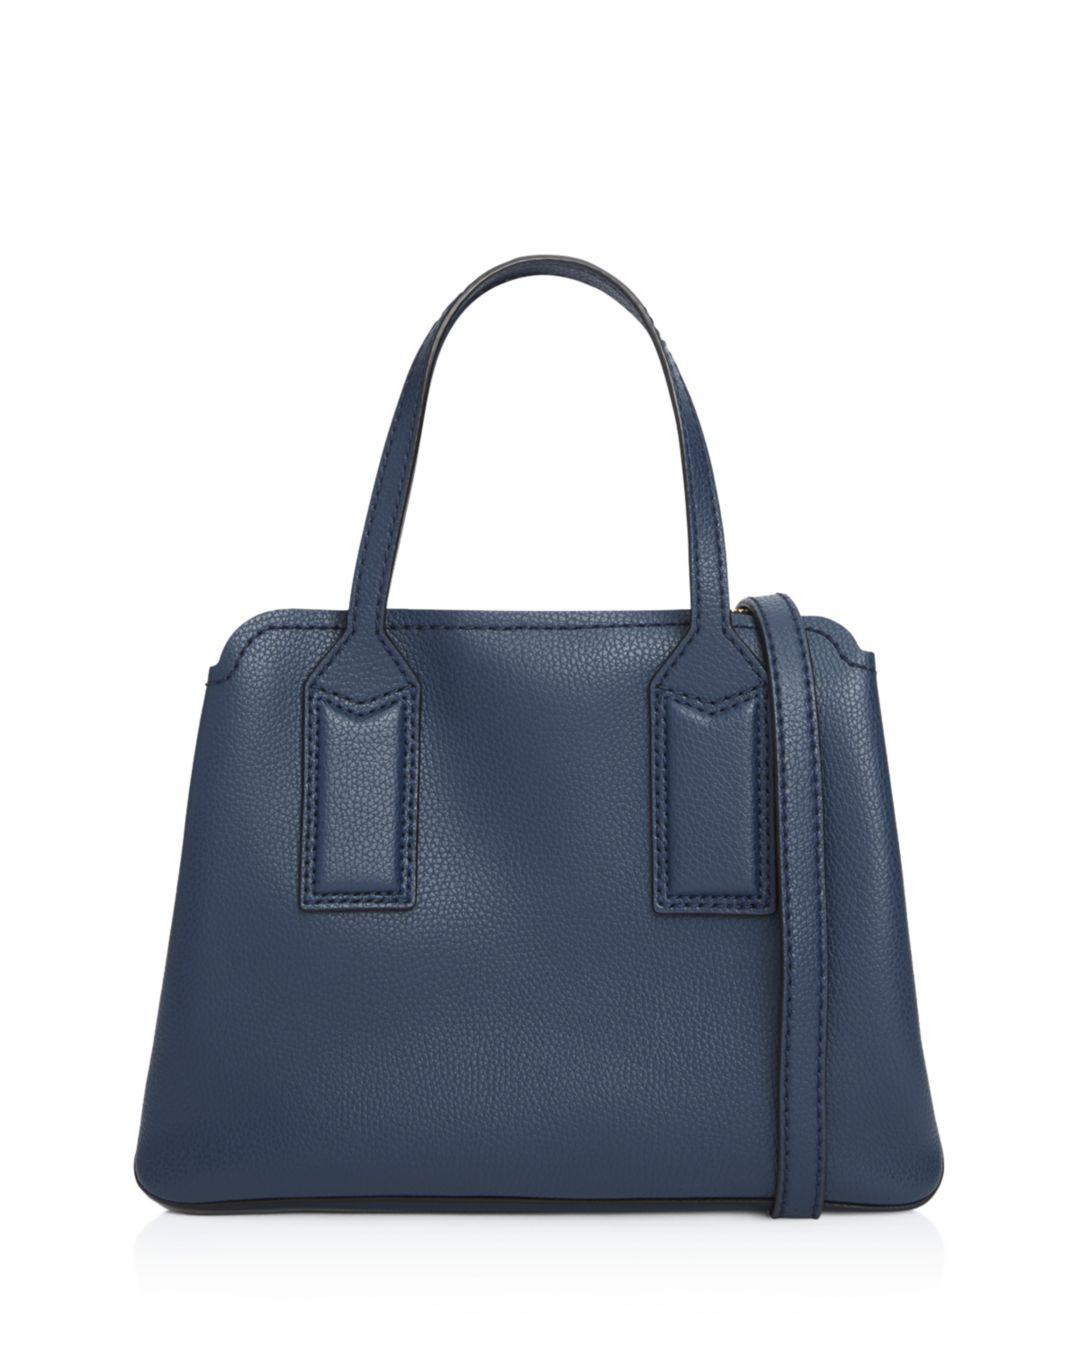 Marc Jacobs The Editor Leather Satchel in Blue - Lyst